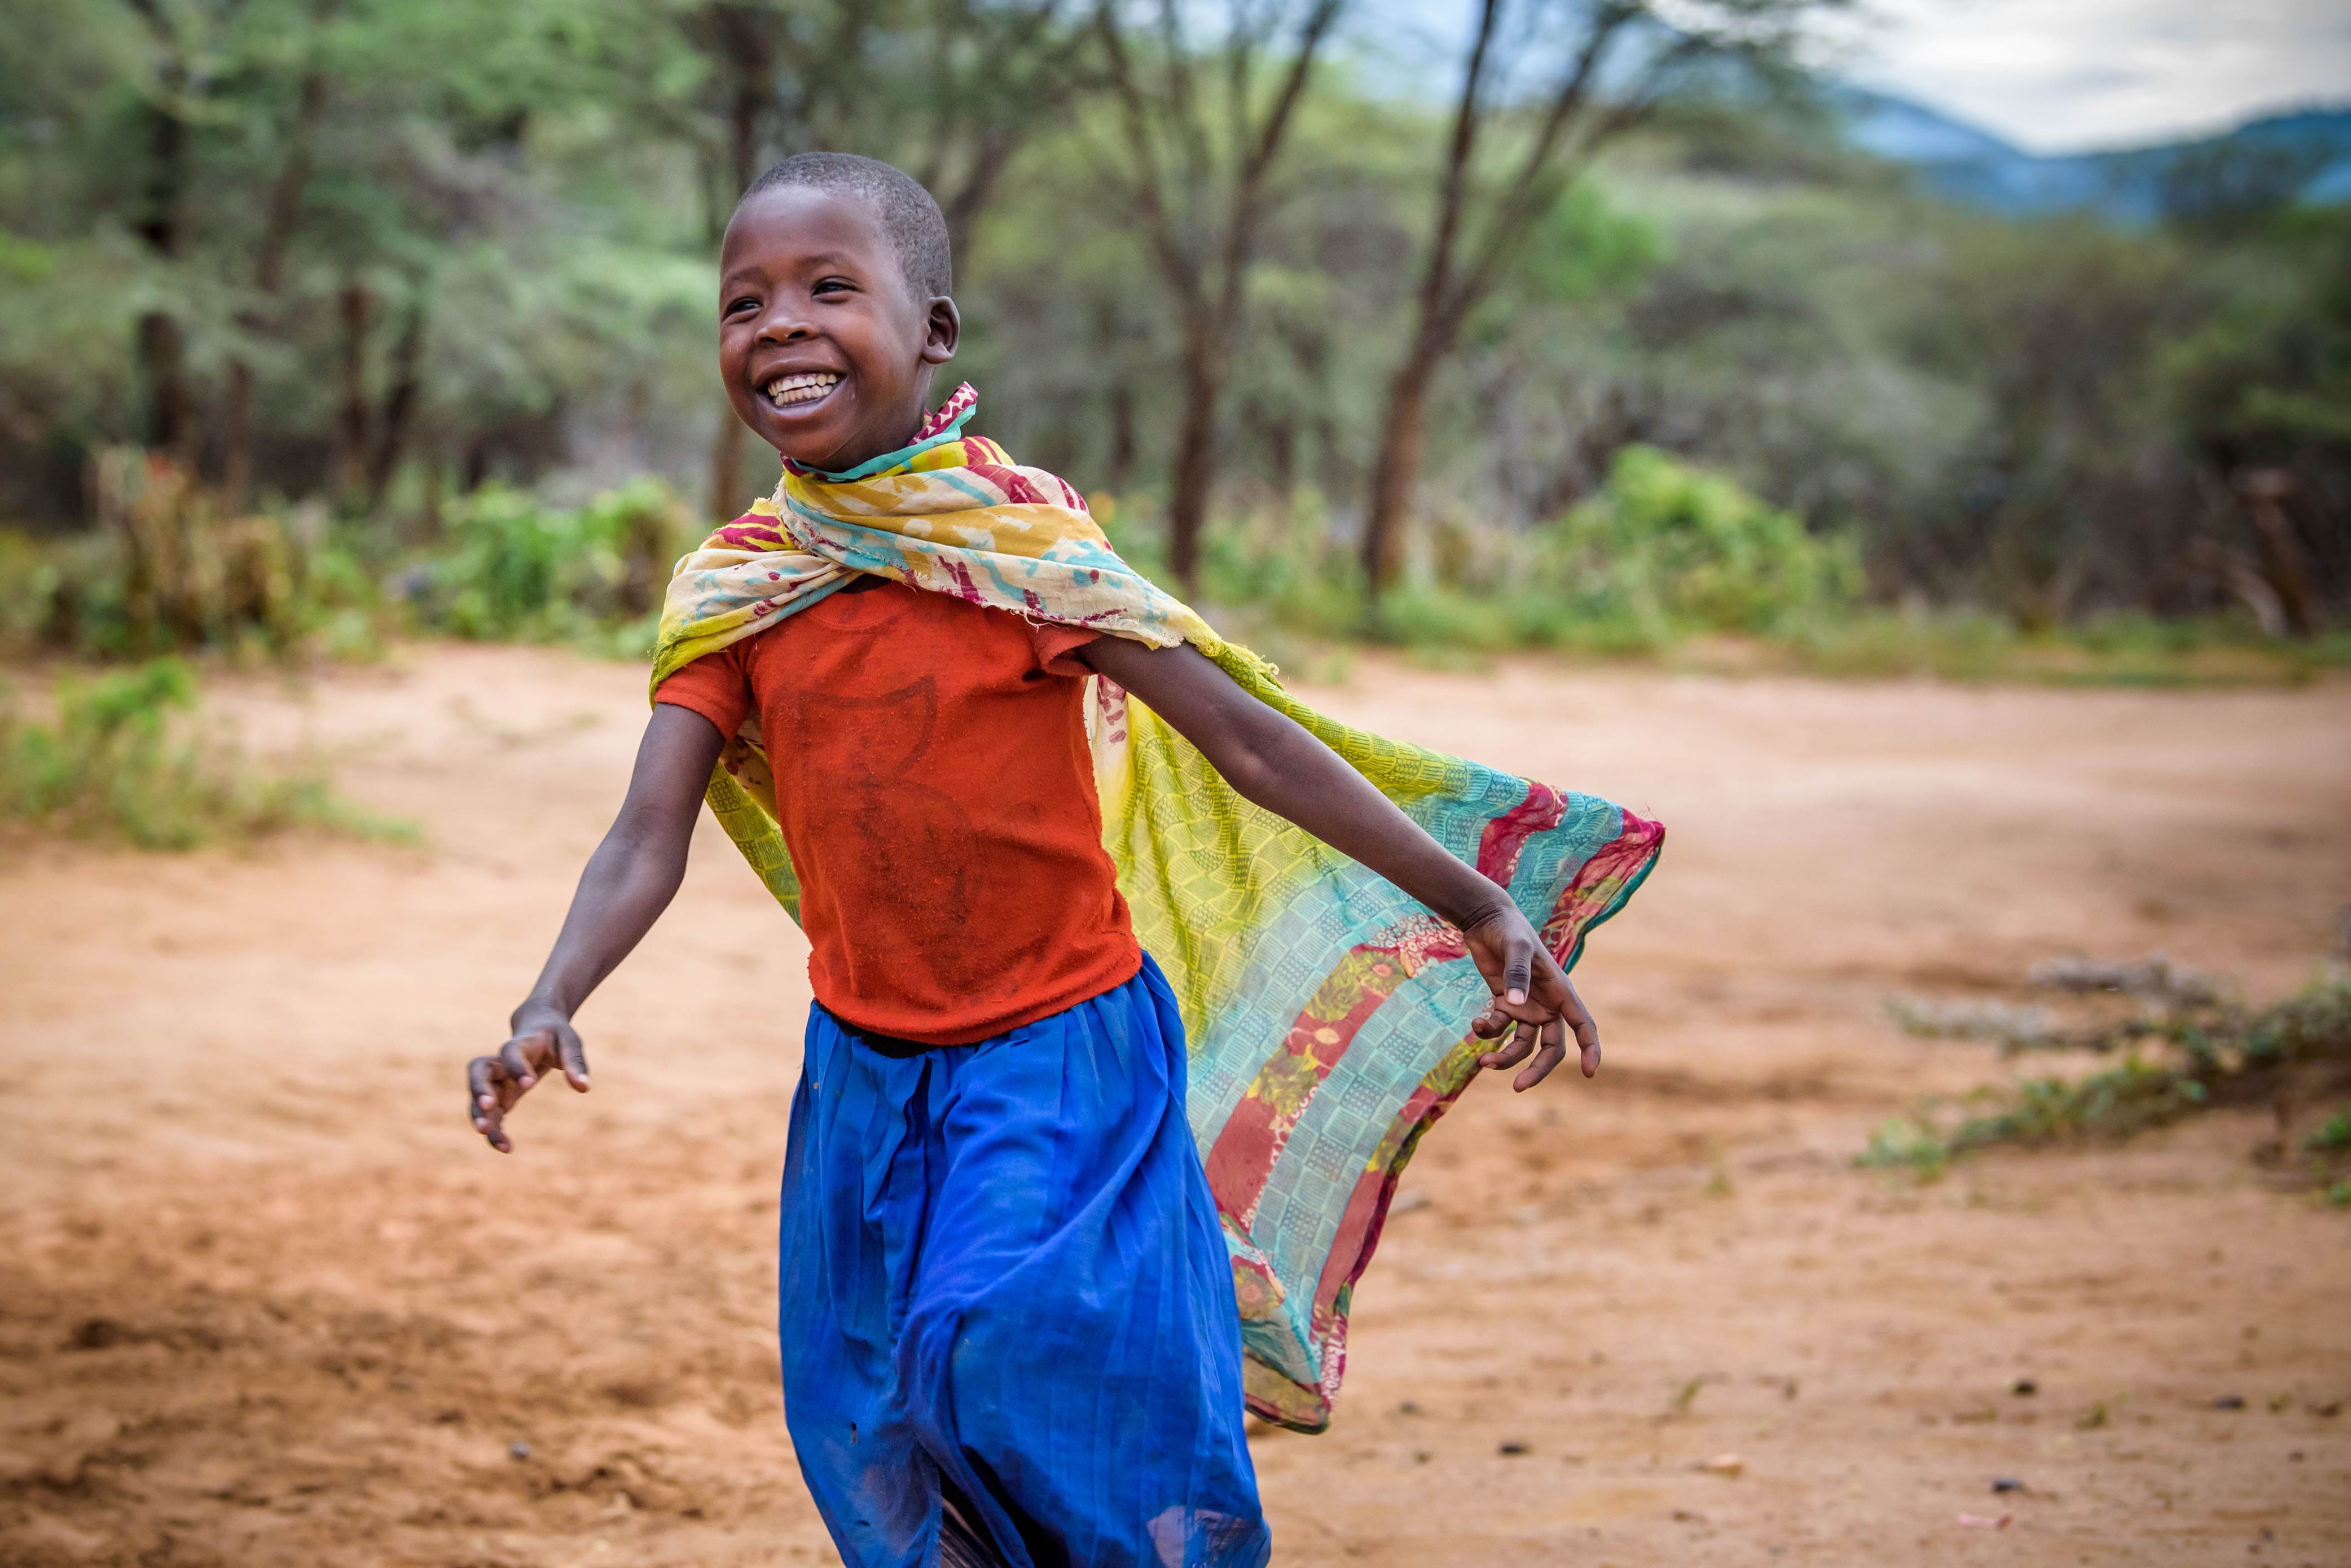 Girl from Kenya grins widely as she runs along a dirt track, with a garment tied over her shoulder like a superhero cape